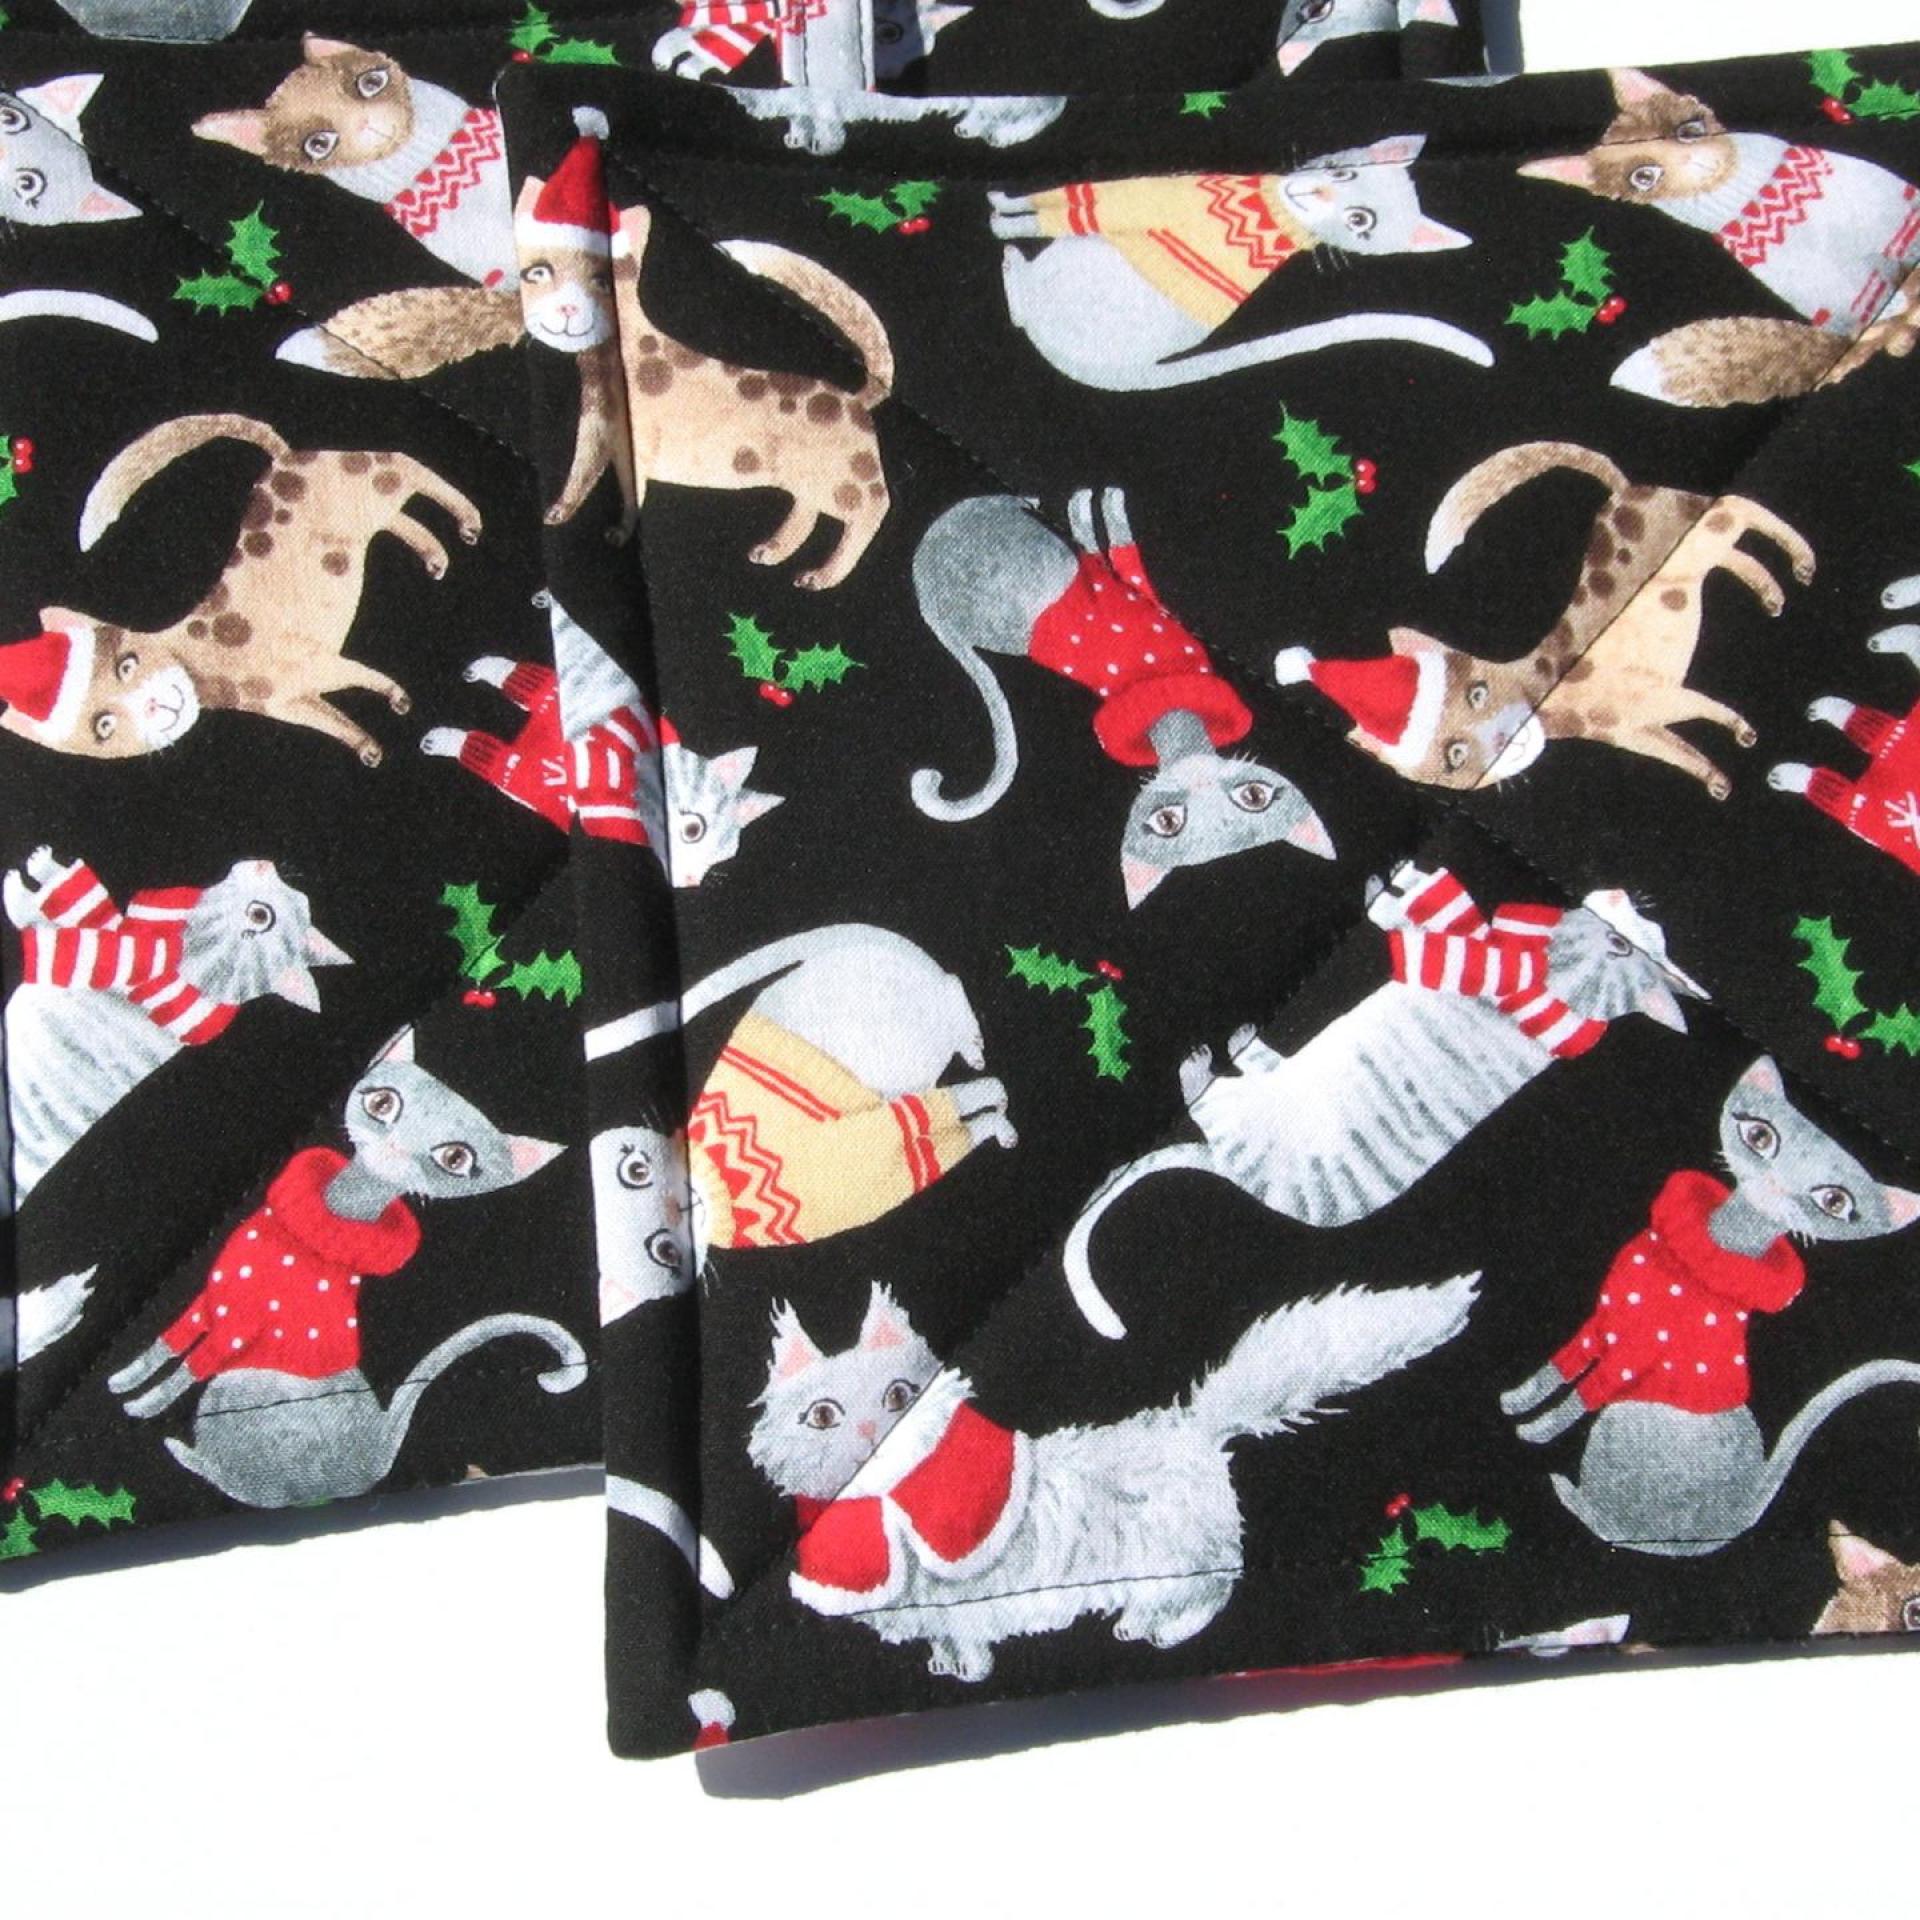 Holiday Cats Potholders, Whimsical Christmas Cats in Sweaters, Quilted Hot Pads for Housewarming and Hostess Gift, Stocking Stuffer